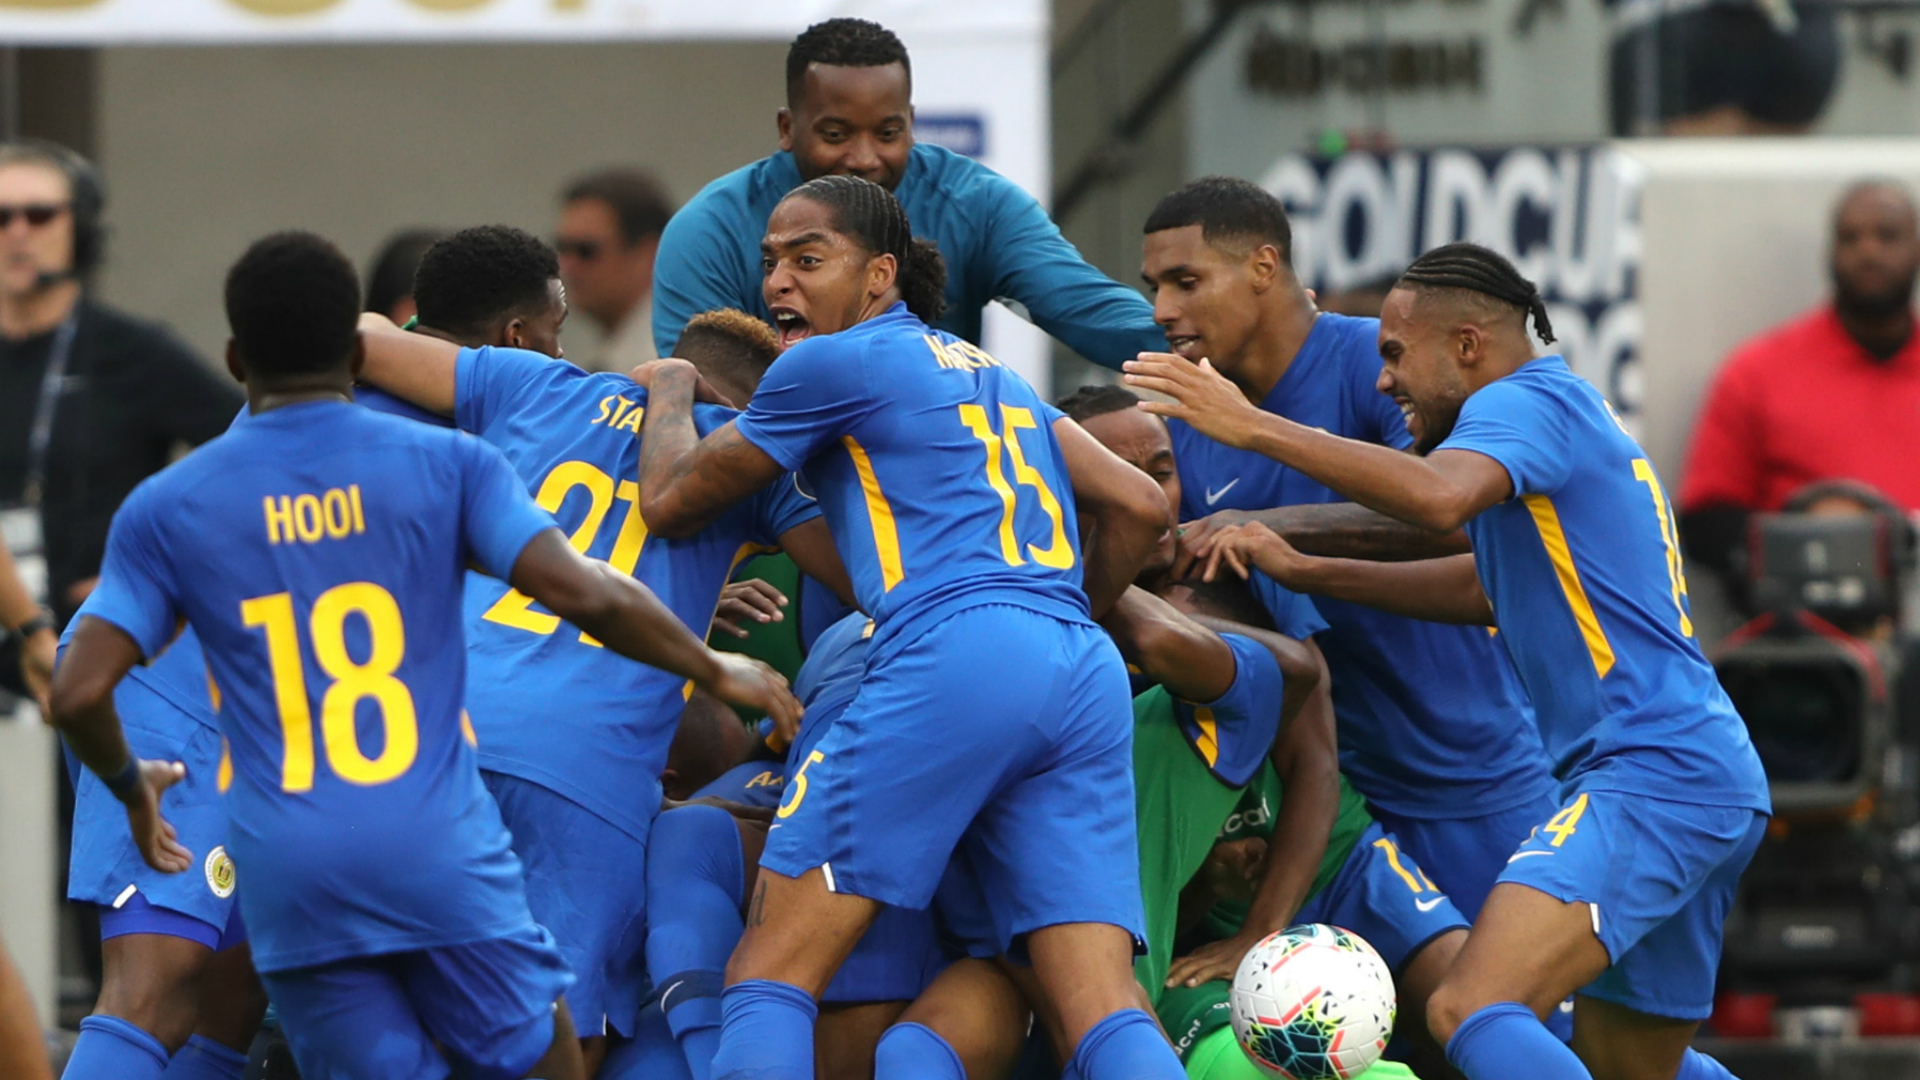 Take a look at the most important goal in Curacao's CONCACAF Gold Cup history and one of the very best at this year's competition.